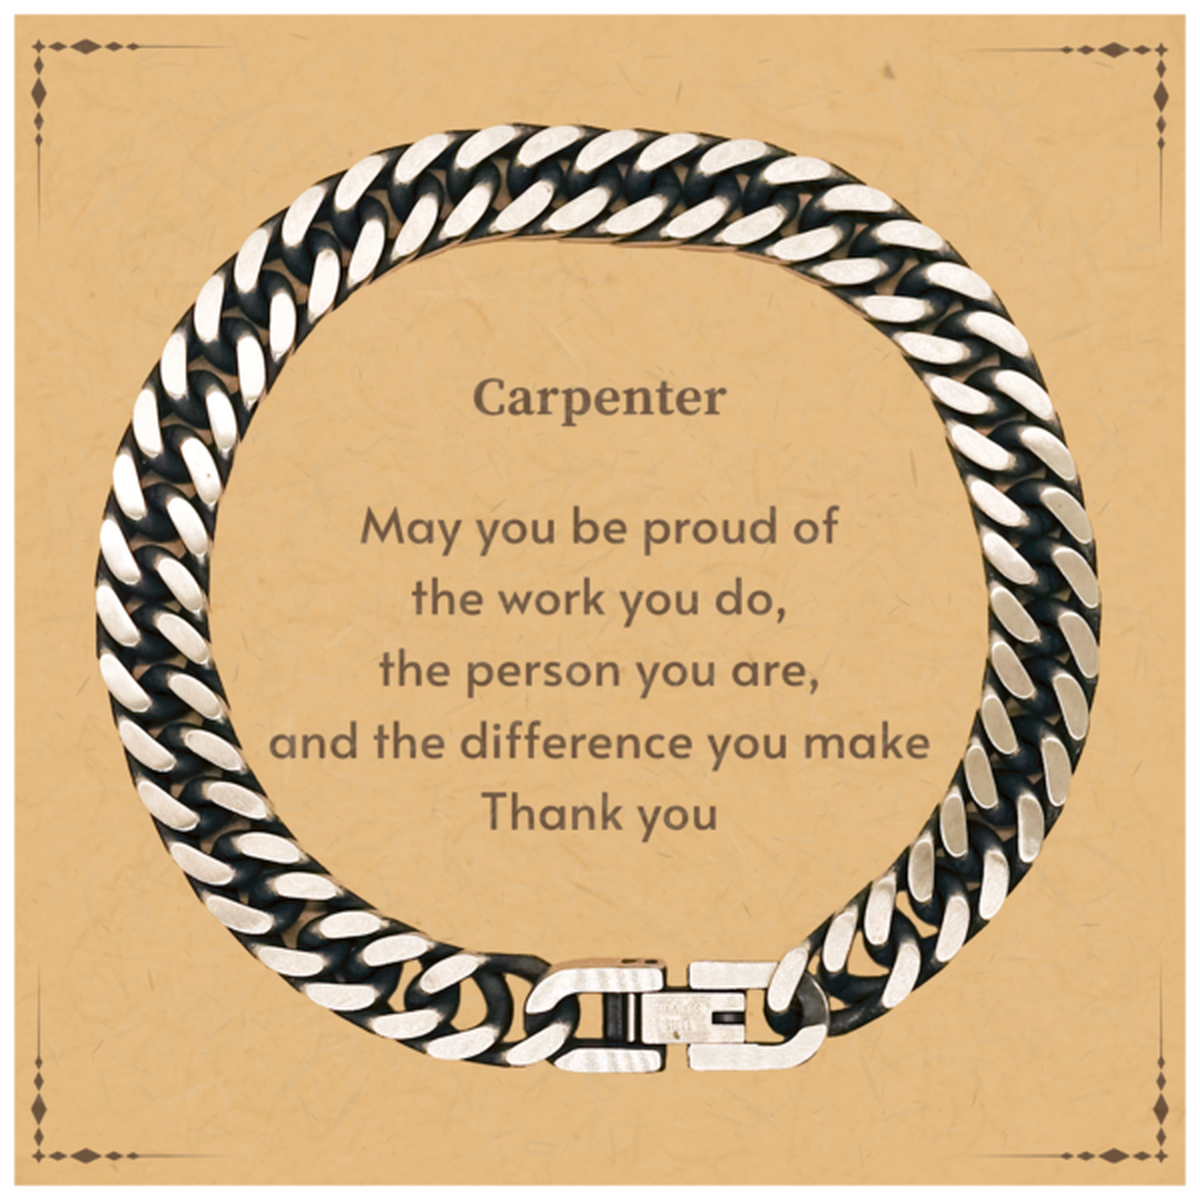 Heartwarming Cuban Link Chain Bracelet Retirement Coworkers Gifts for Carpenter, Carpenter May You be proud of the work you do, the person you are Gifts for Boss Men Women Friends